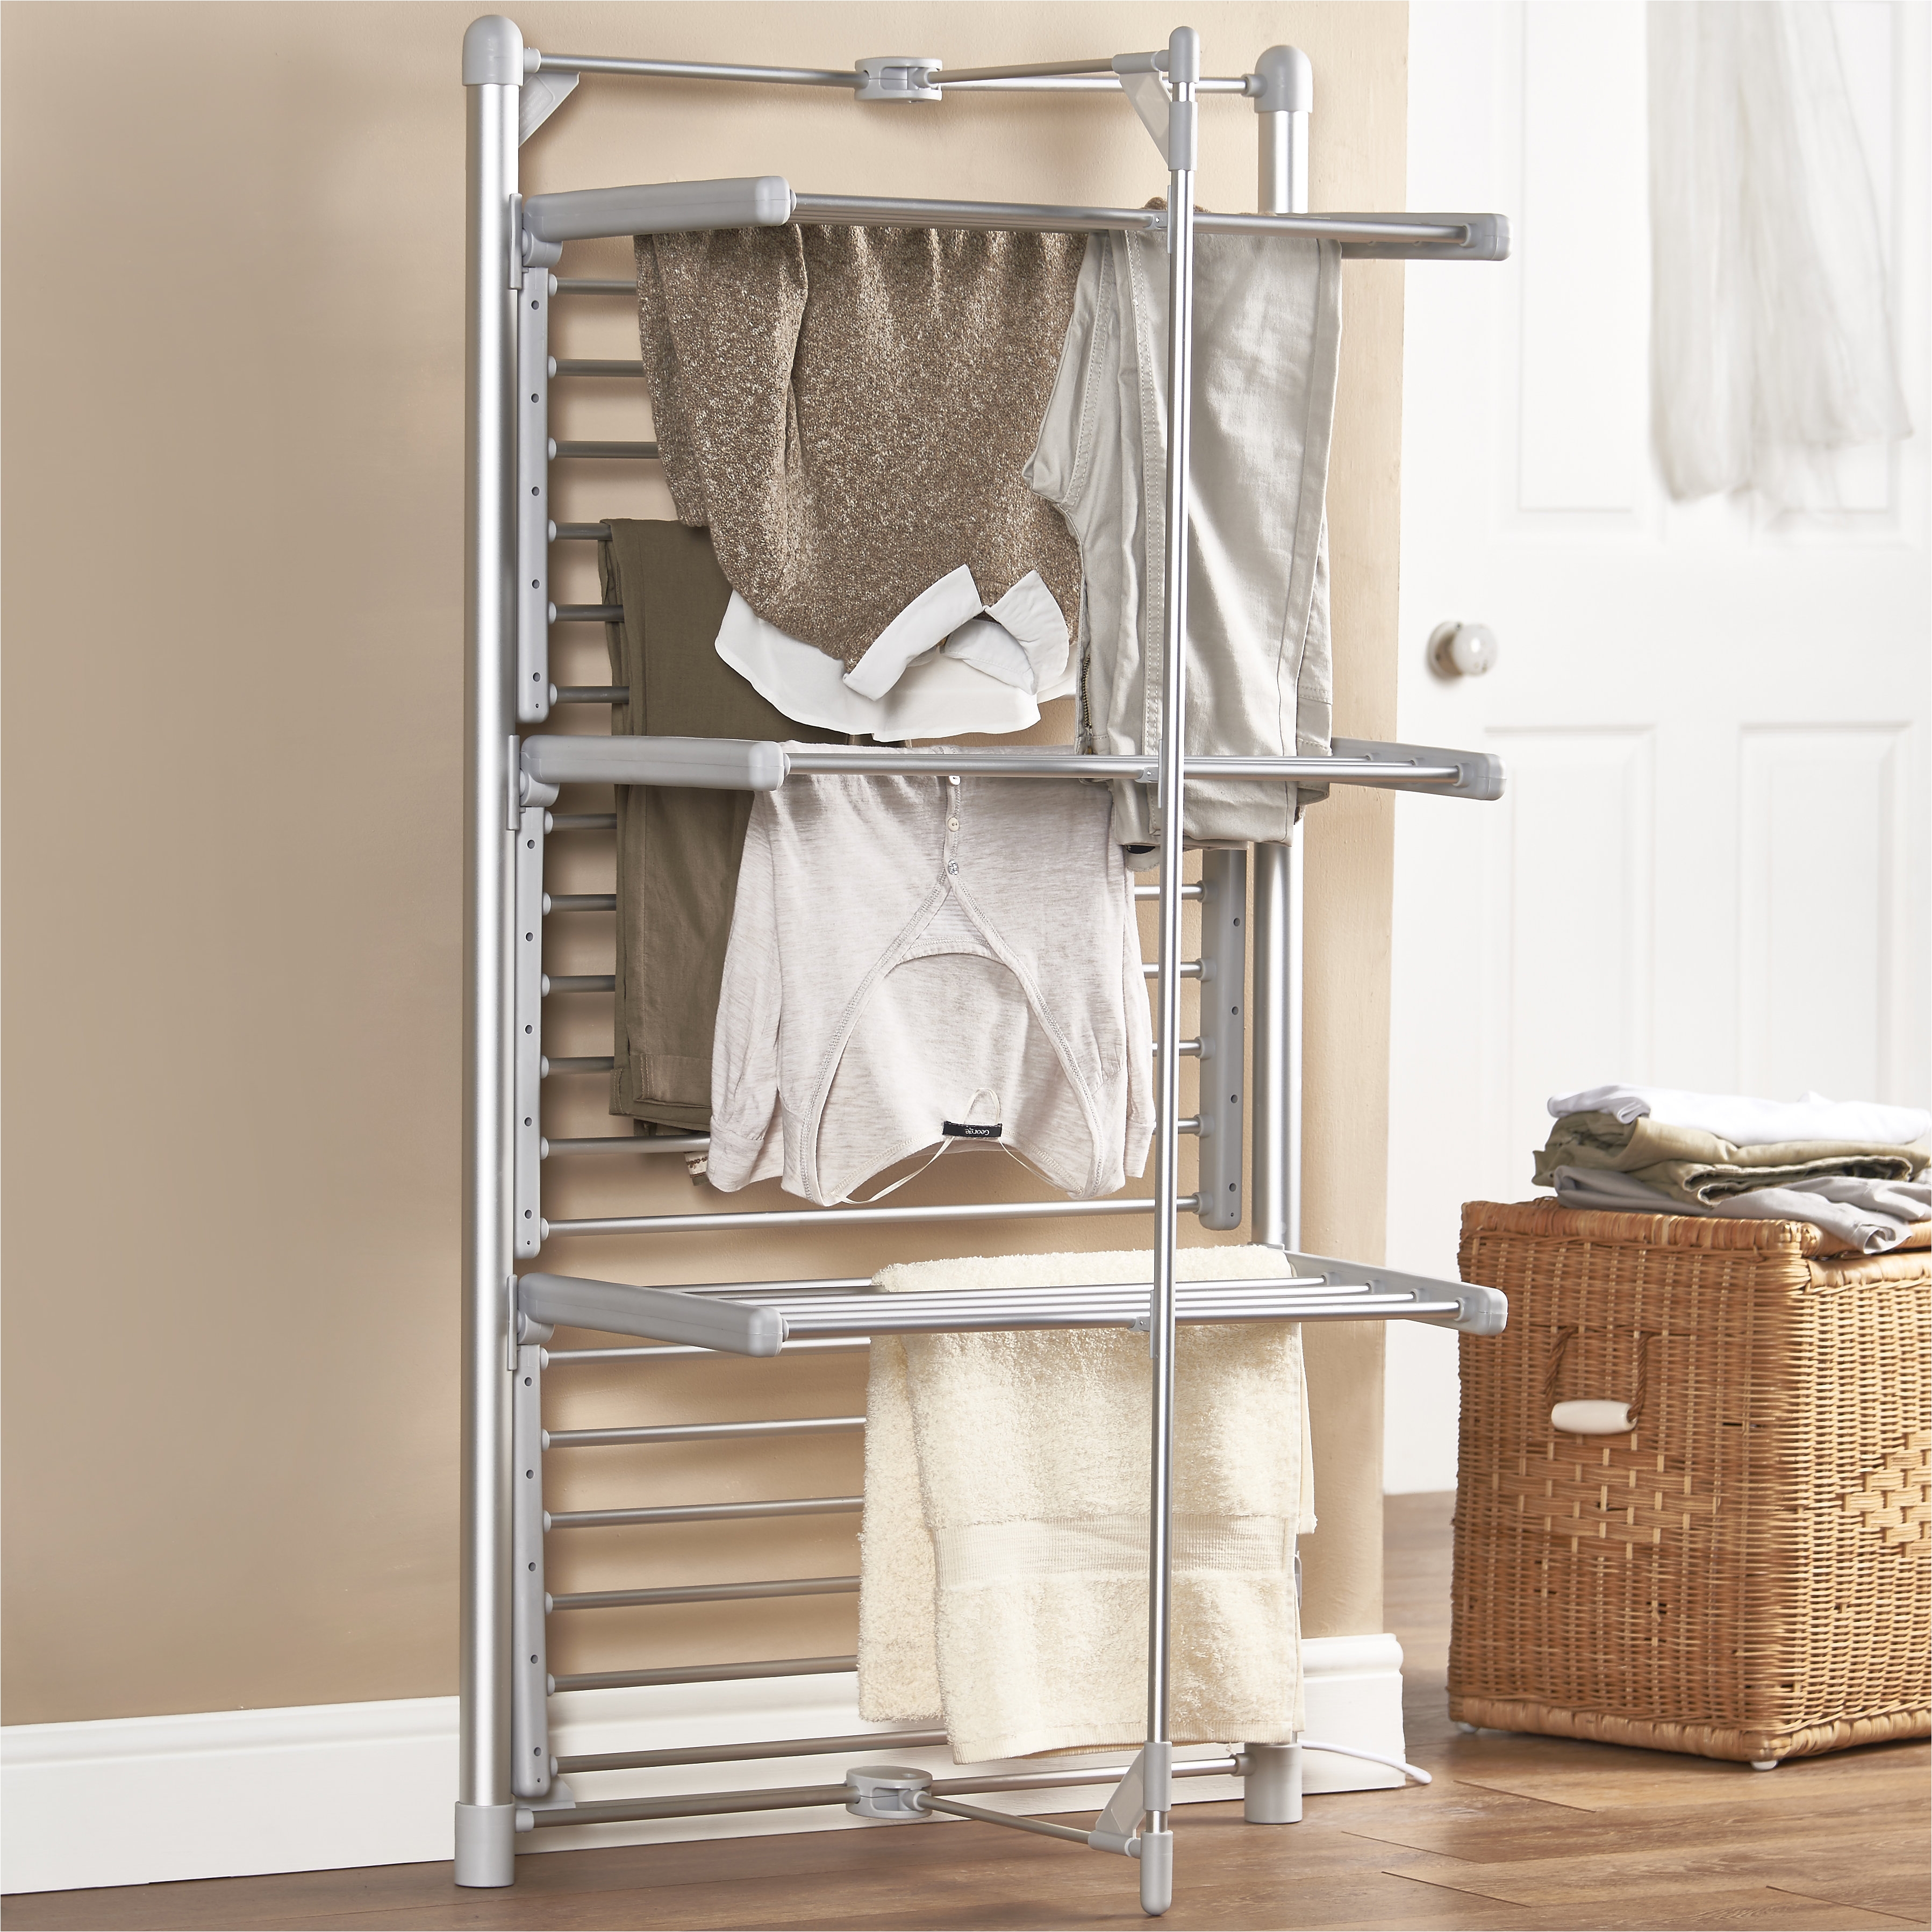 heated clothes drying rack jpg